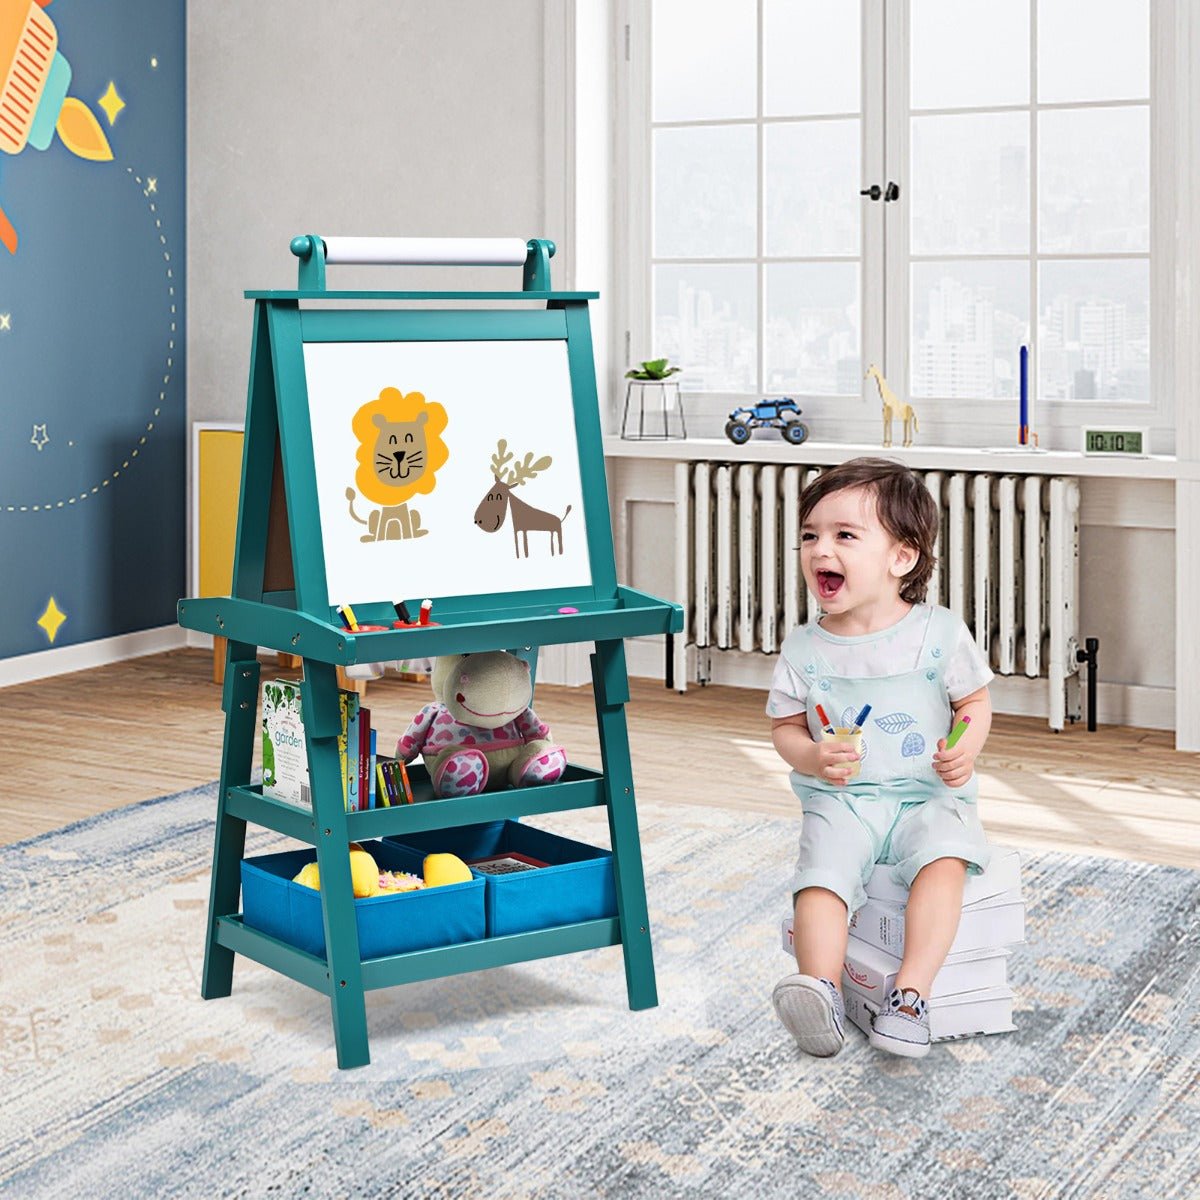 Buy the Ultimate Teal Blue Double Sided Easel - Artistic Adventures Await